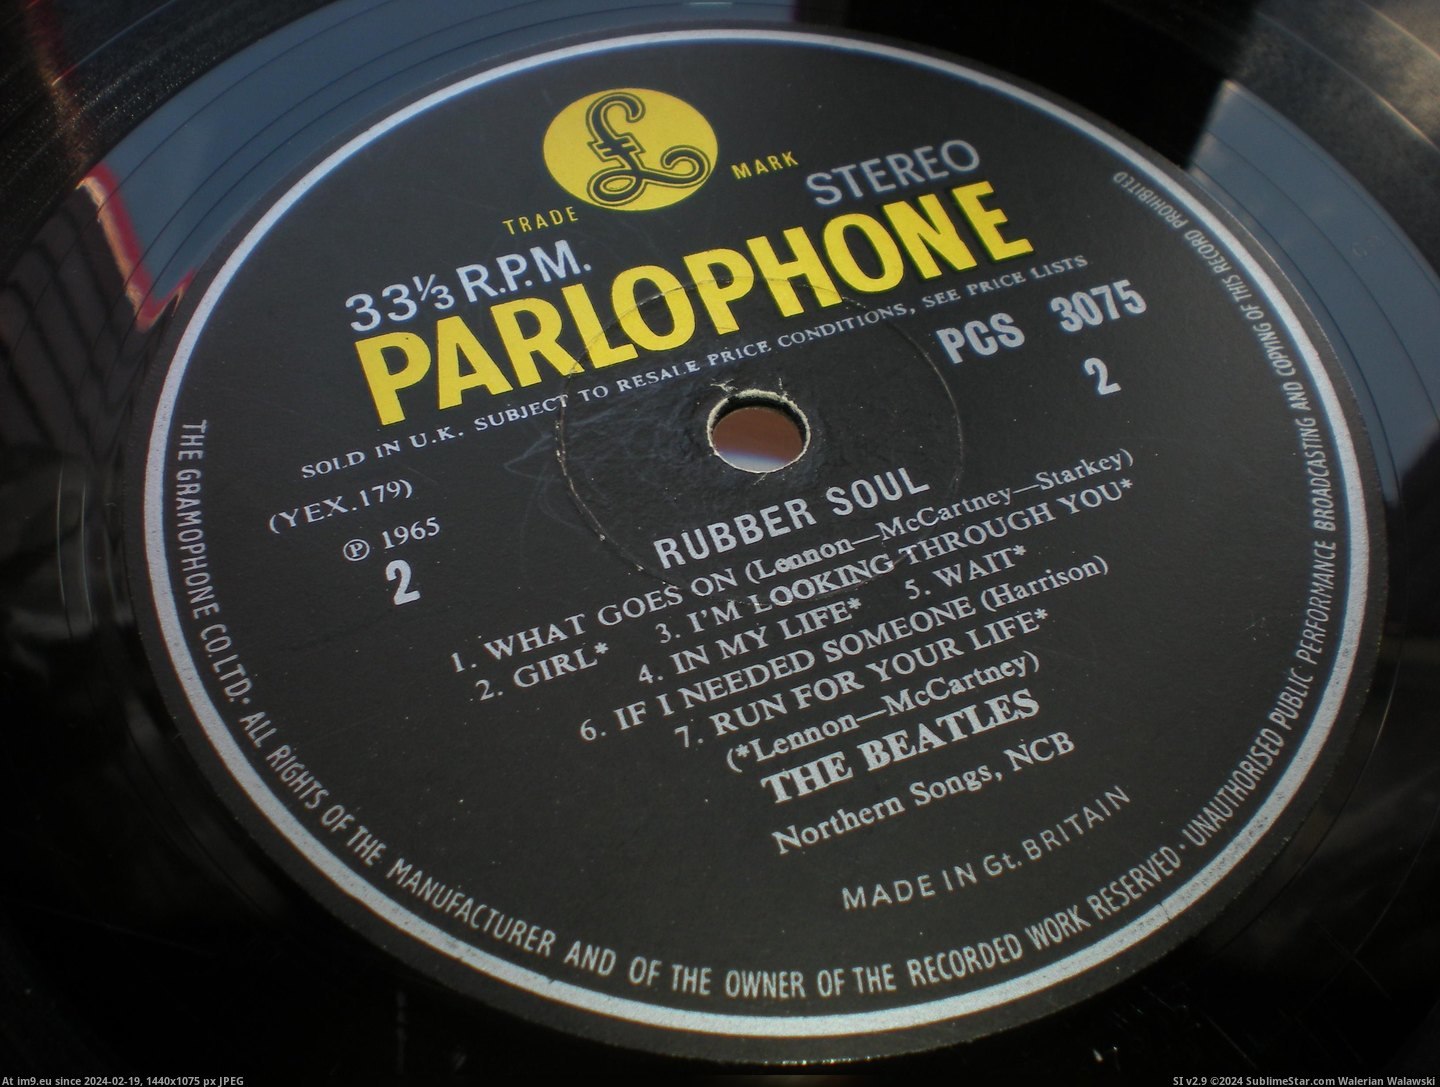 #Rubber #Stereo #Soul Rubber Soul STEREO 4 Pic. (Изображение из альбом new 1))